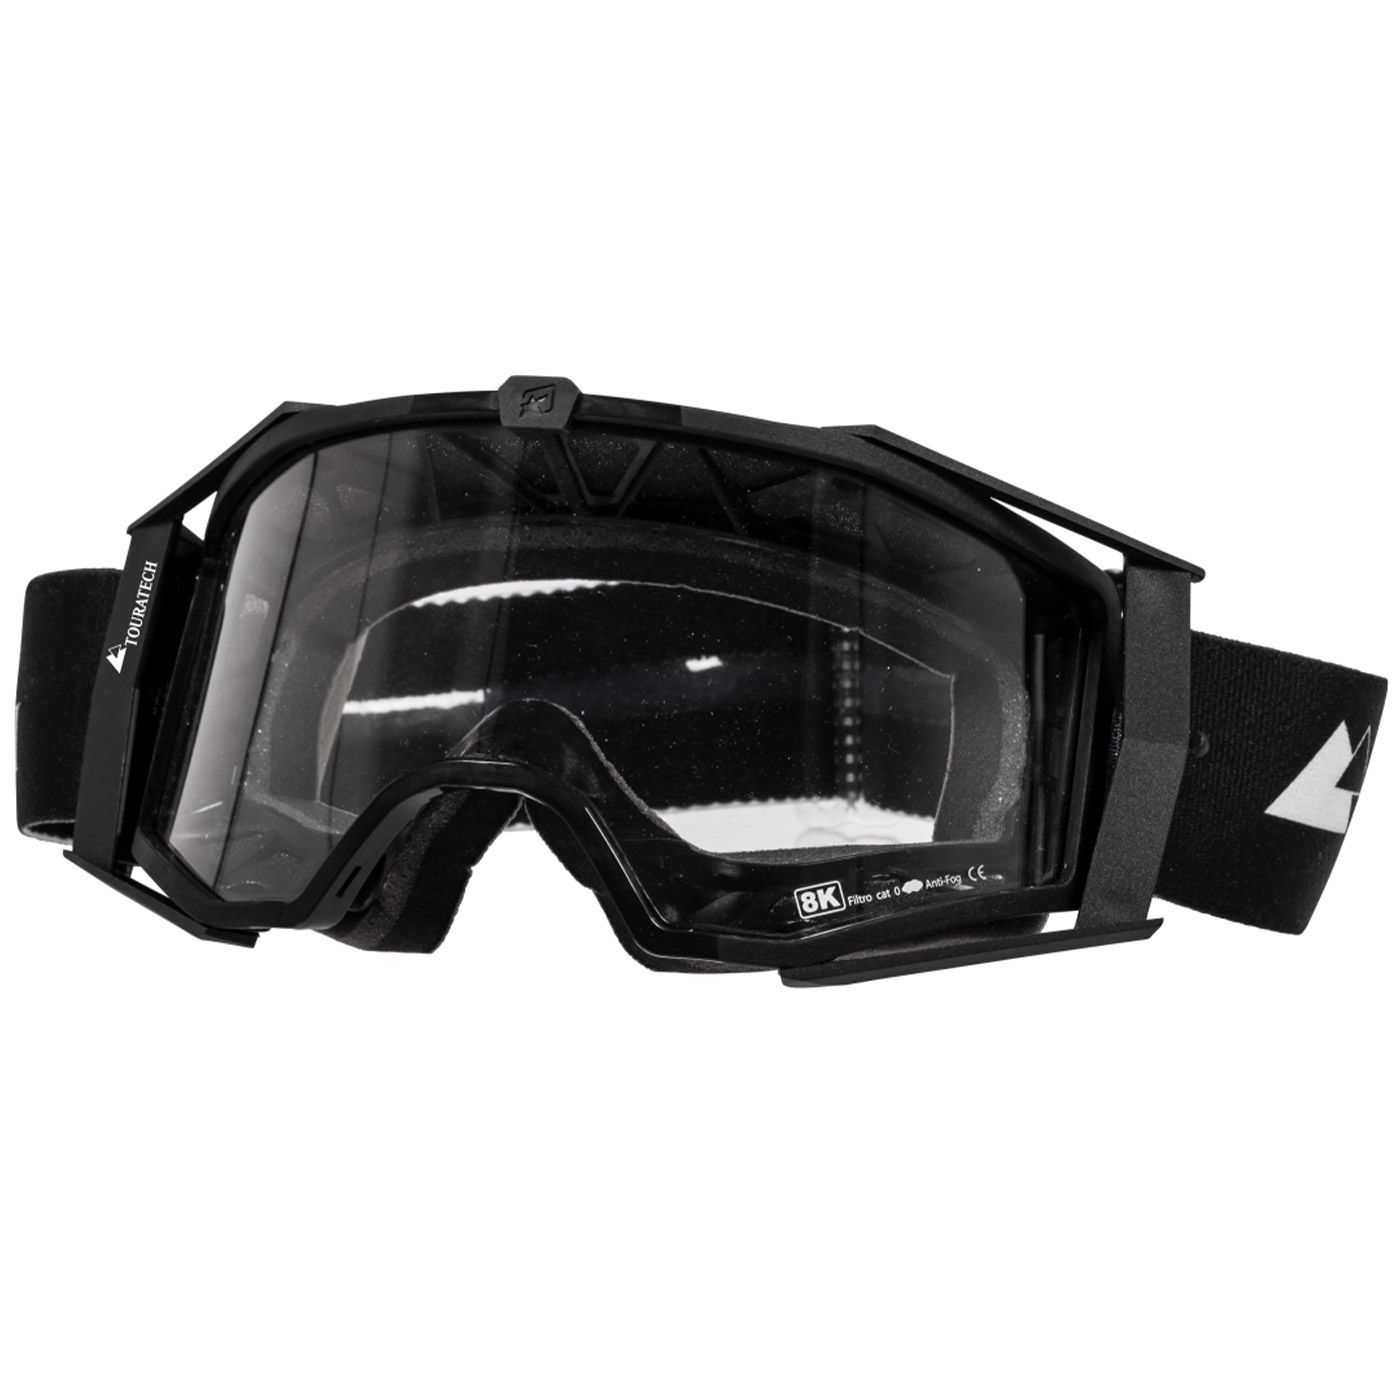 Goggle Aventuro 8K with clear lens